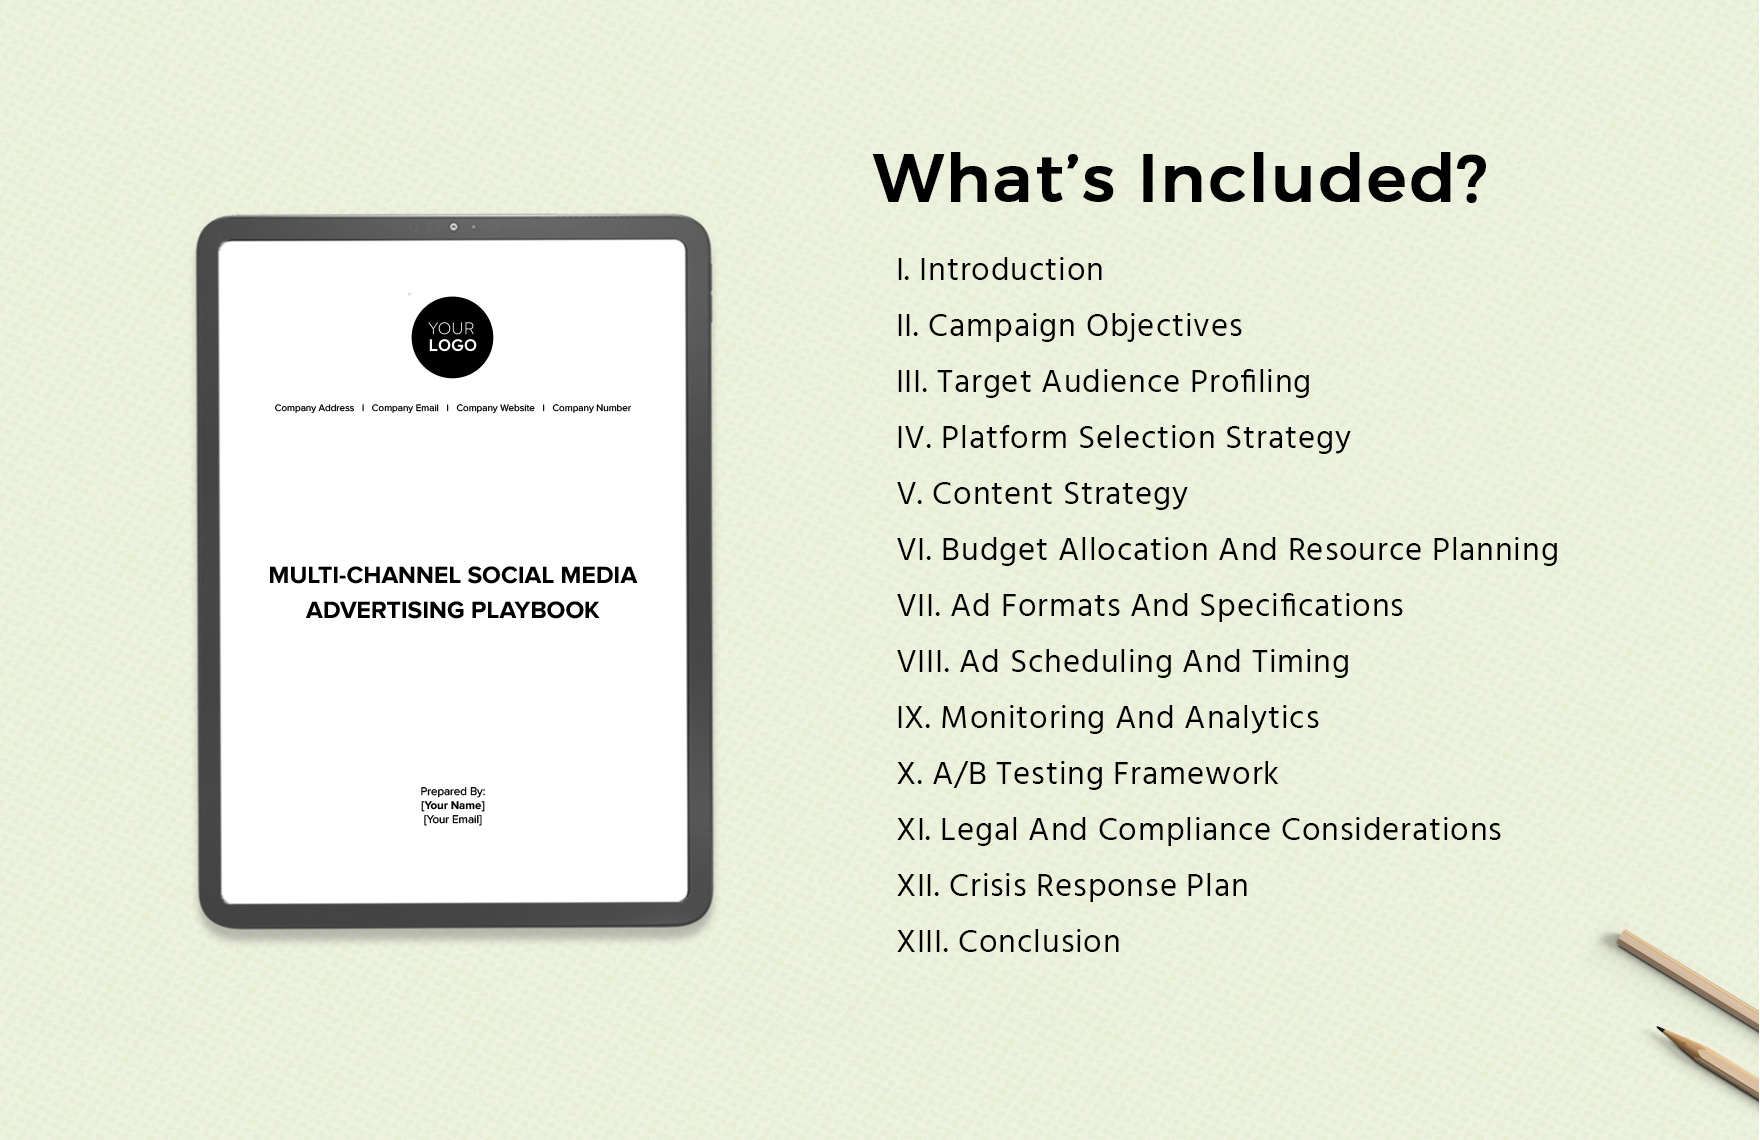 Multi-Channel Social Media Advertising Playbook Template